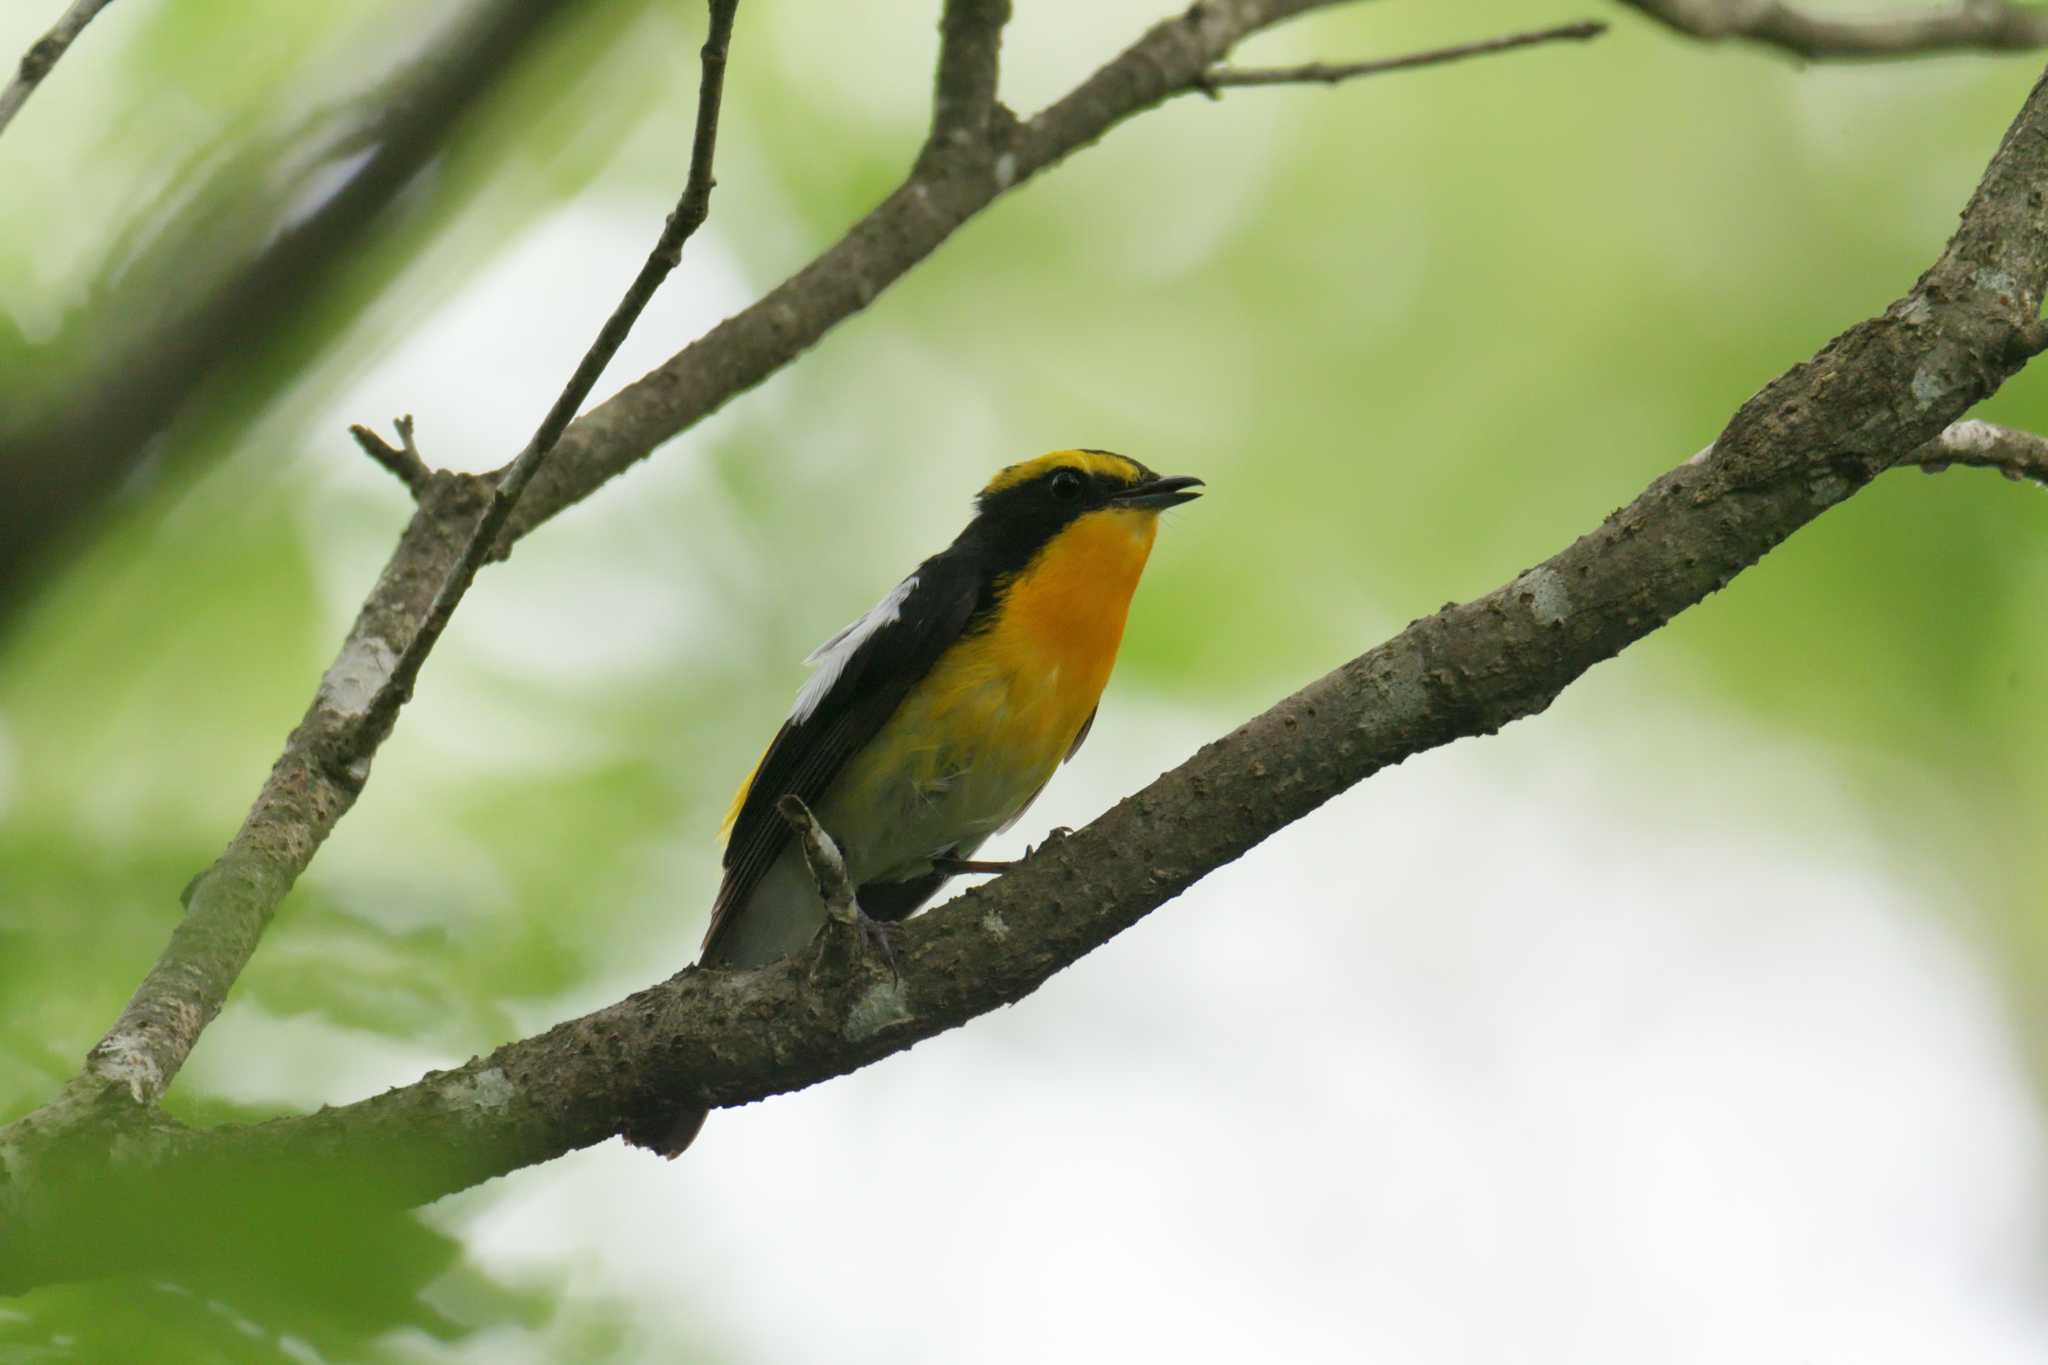 Photo of Narcissus Flycatcher at 滋賀県甲賀市甲南町創造の森 by masatsubo